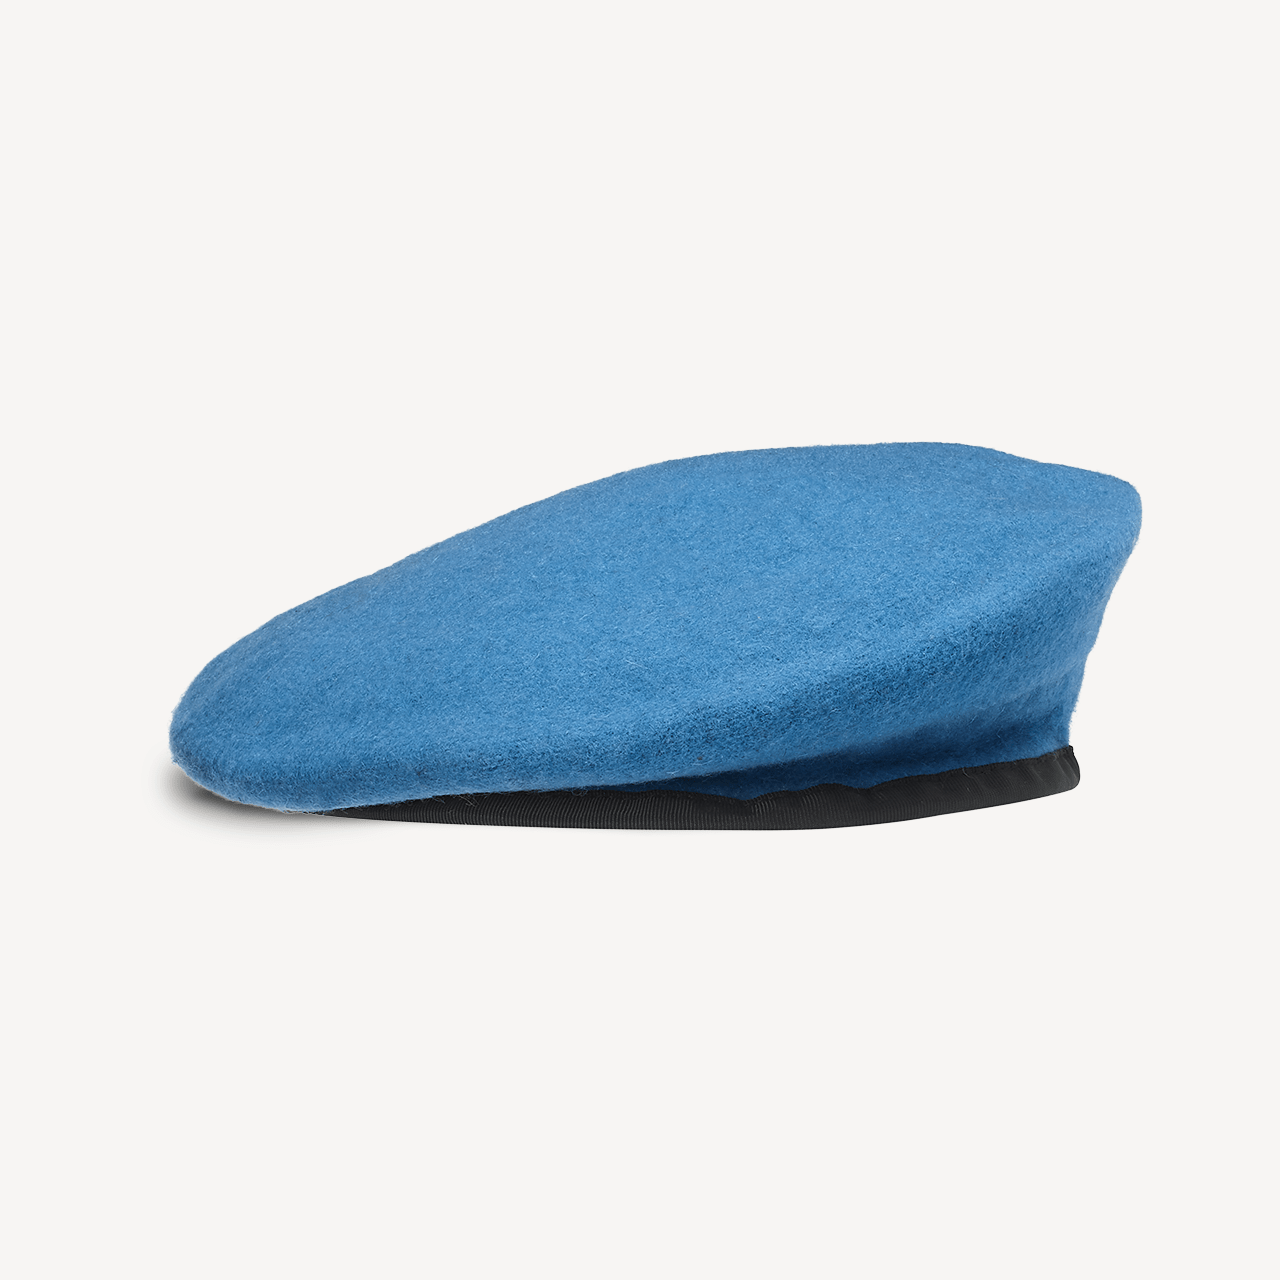 Military Beret in UN Blue - Swaine